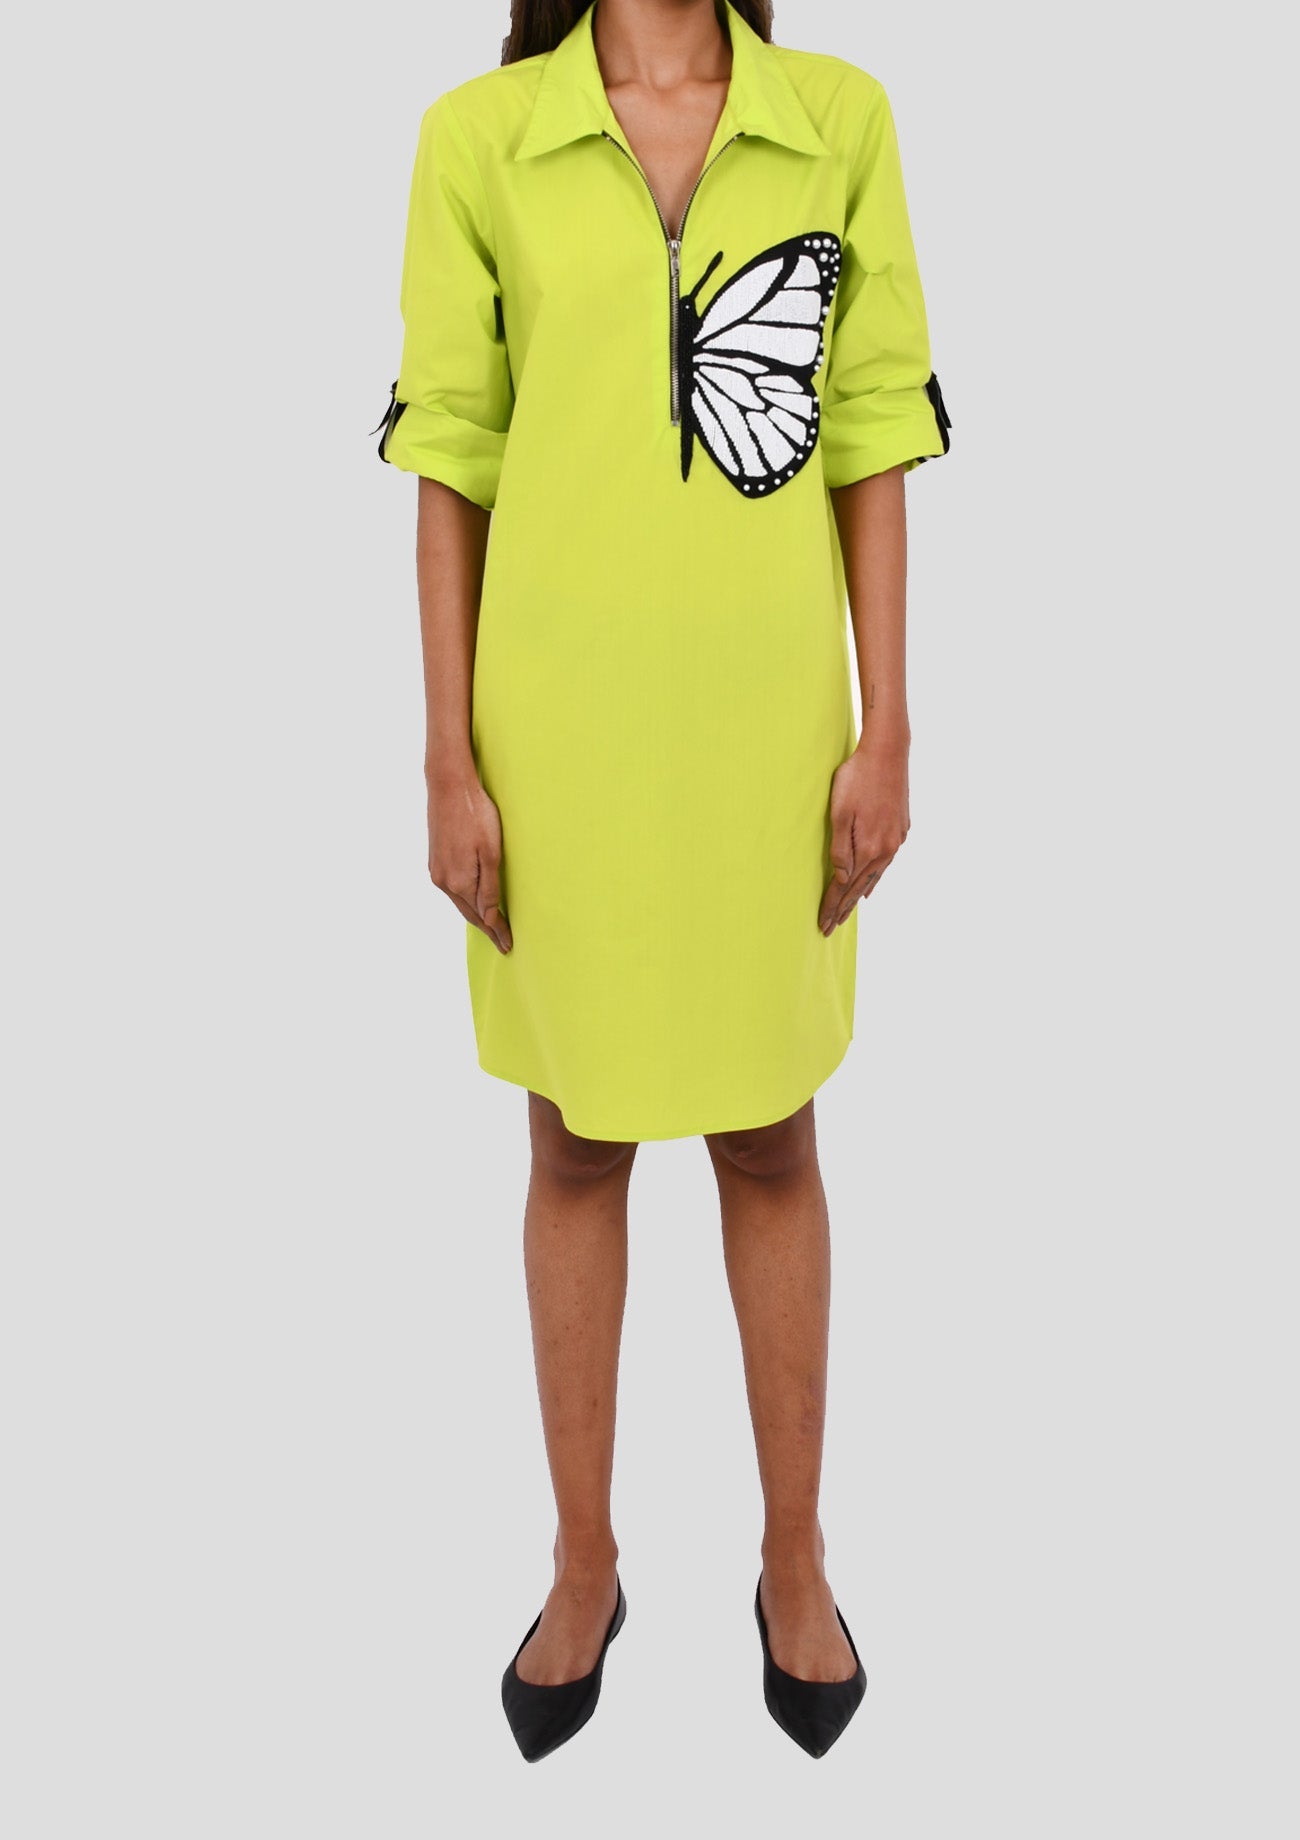 Green Cotton Dress With White Butterfly